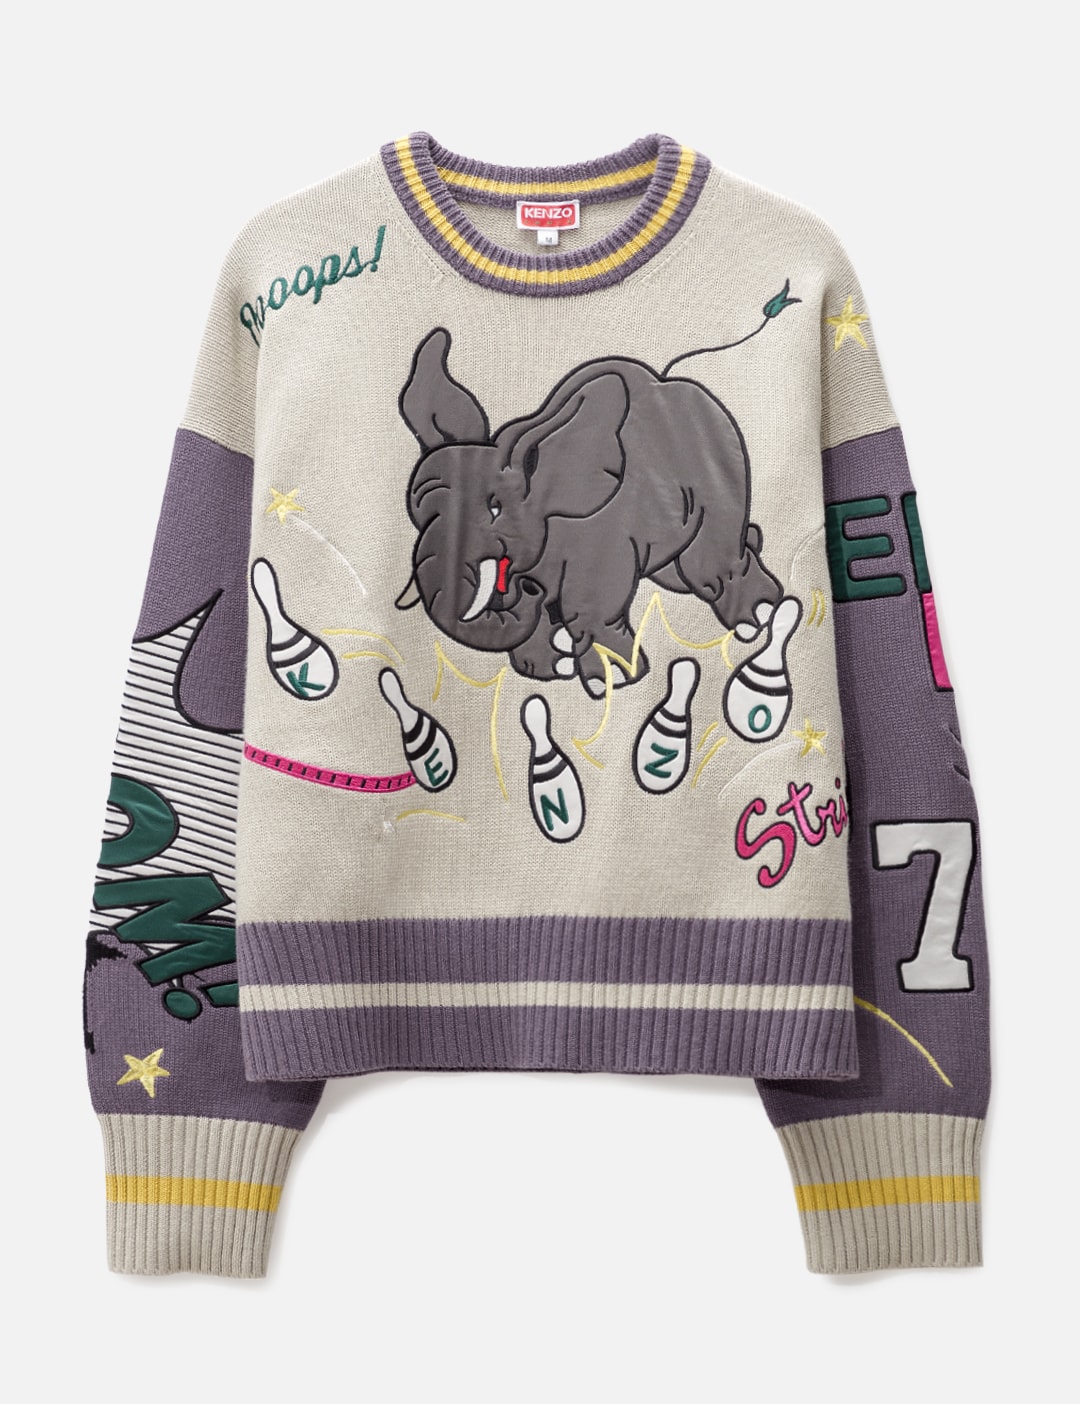 Kenzo - 'Bowling Elephant' Merino Jumper | HBX - Globally Curated and Lifestyle by Hypebeast